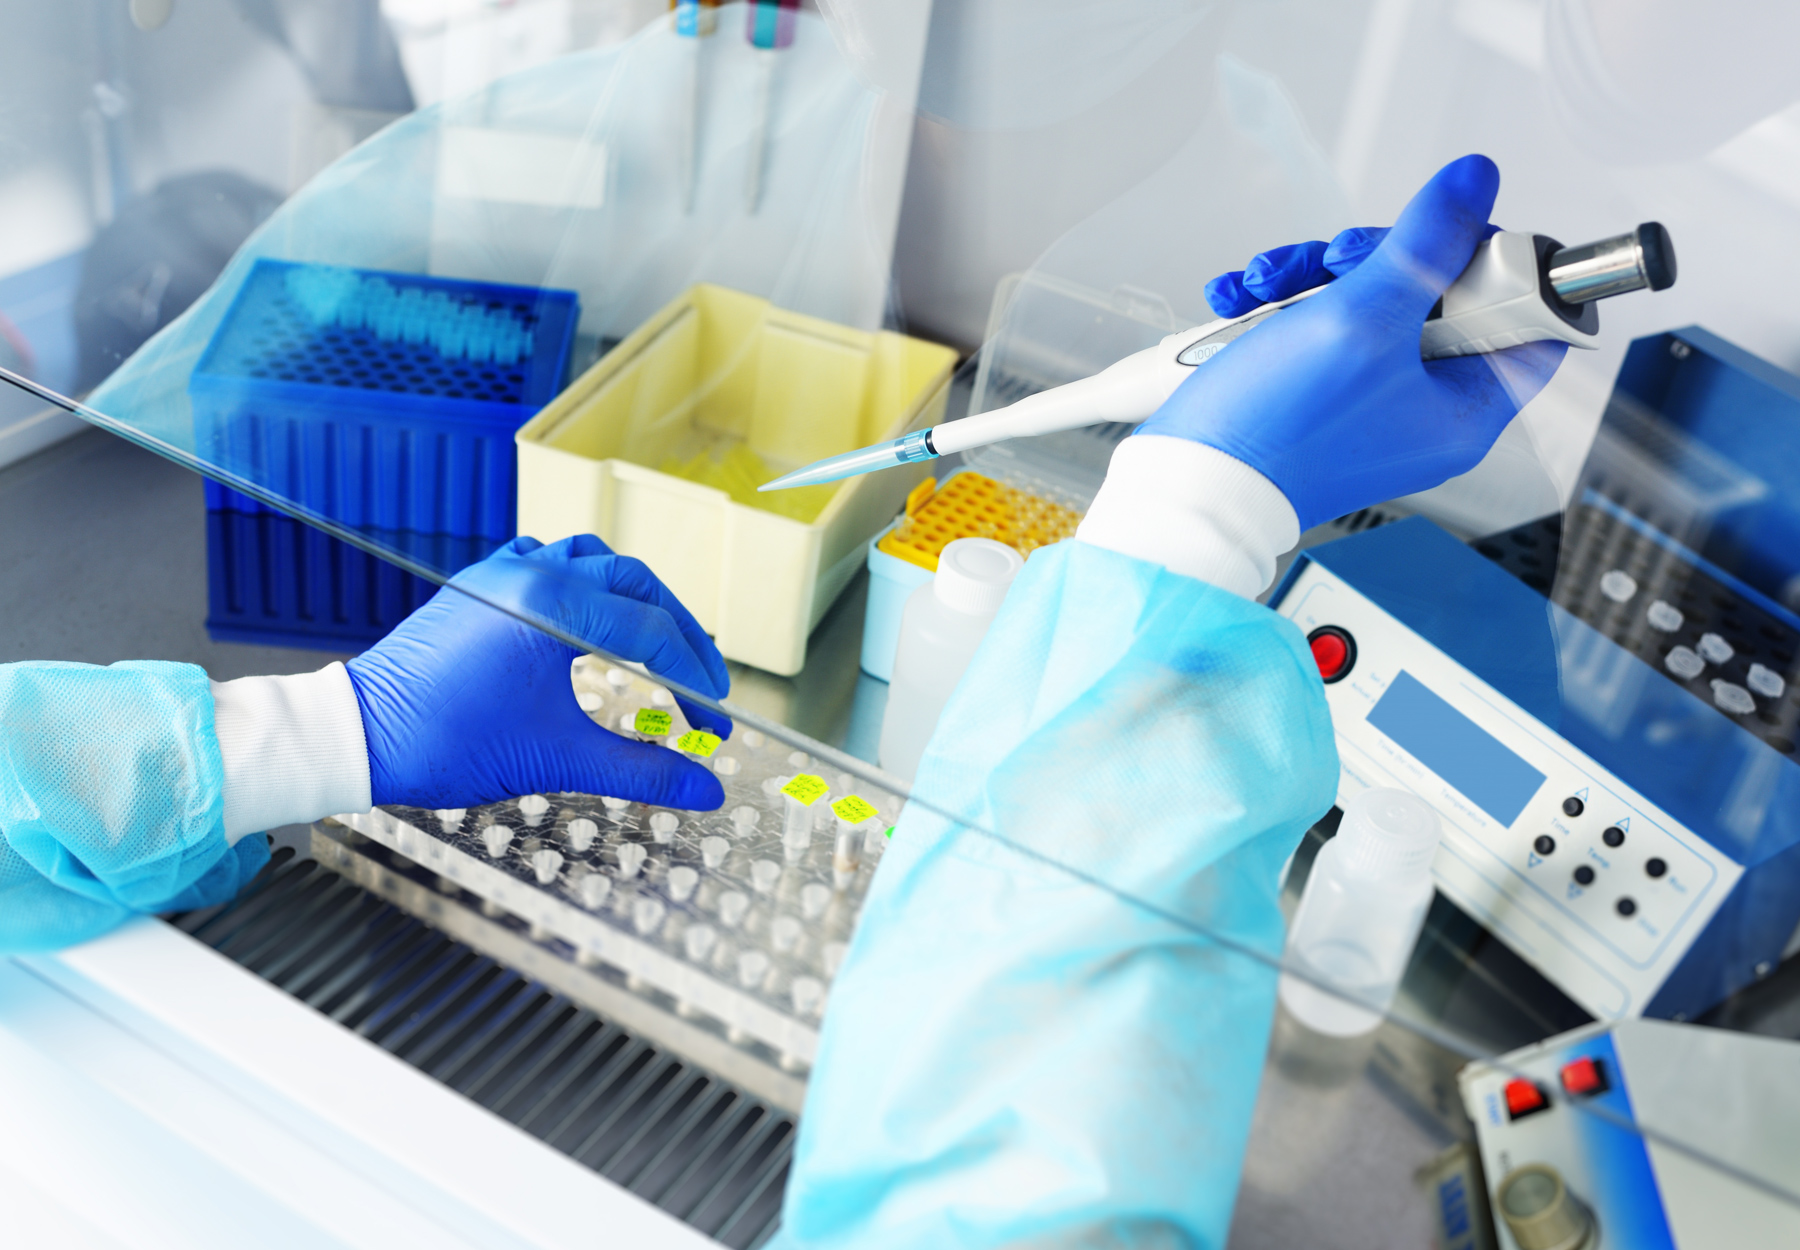 Closeup of lab professional's hands working with a pipette in a fume hood in a PCR laboratory. iStock image.